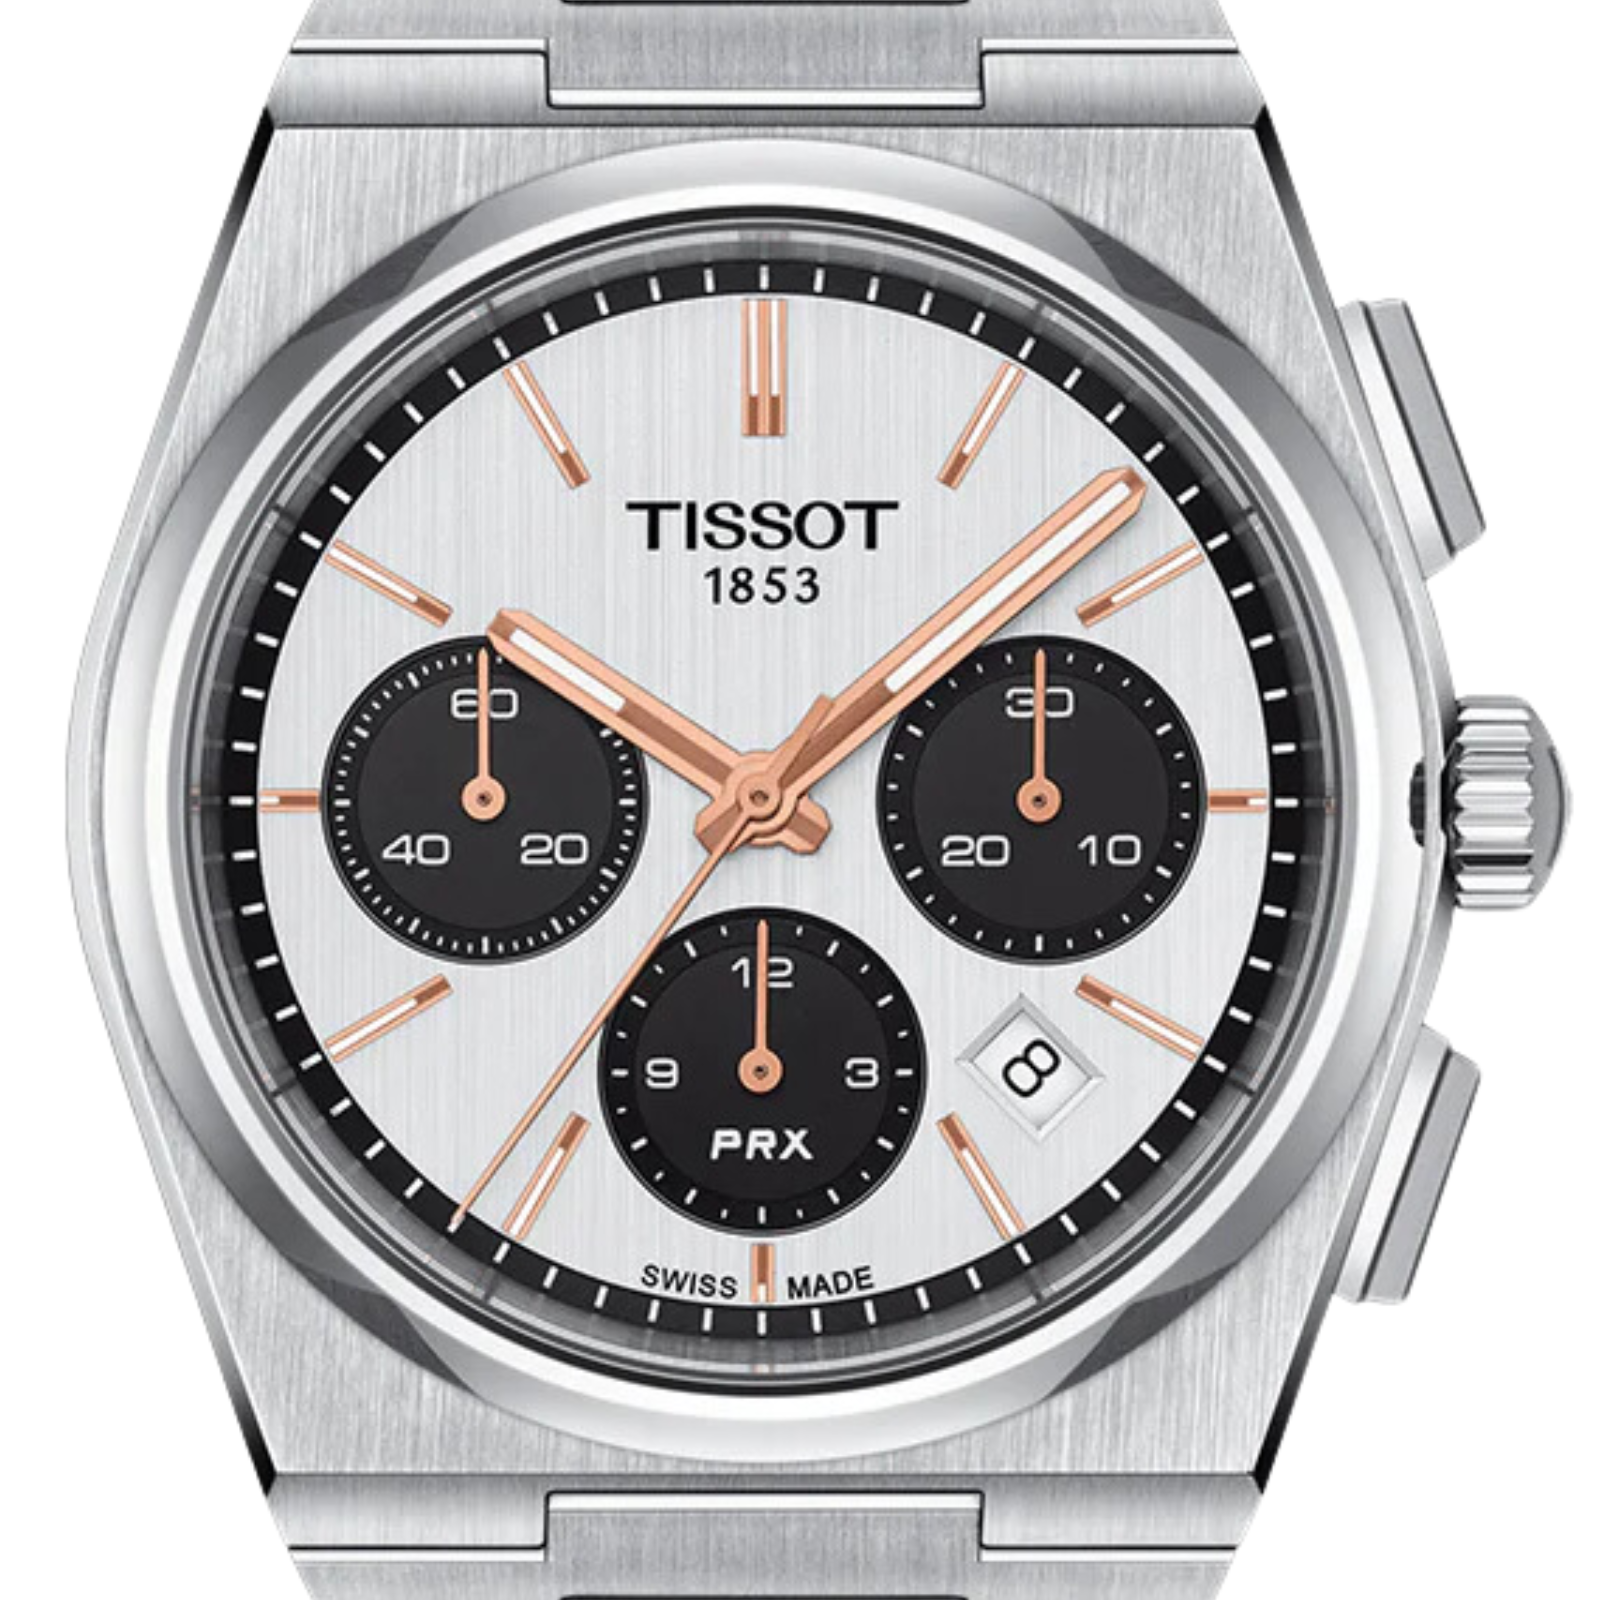 Tissot 1853 PRX T137.427.11.011.00 T1374271101100 Chronograph Automatic White Dial Watch - Skywatches